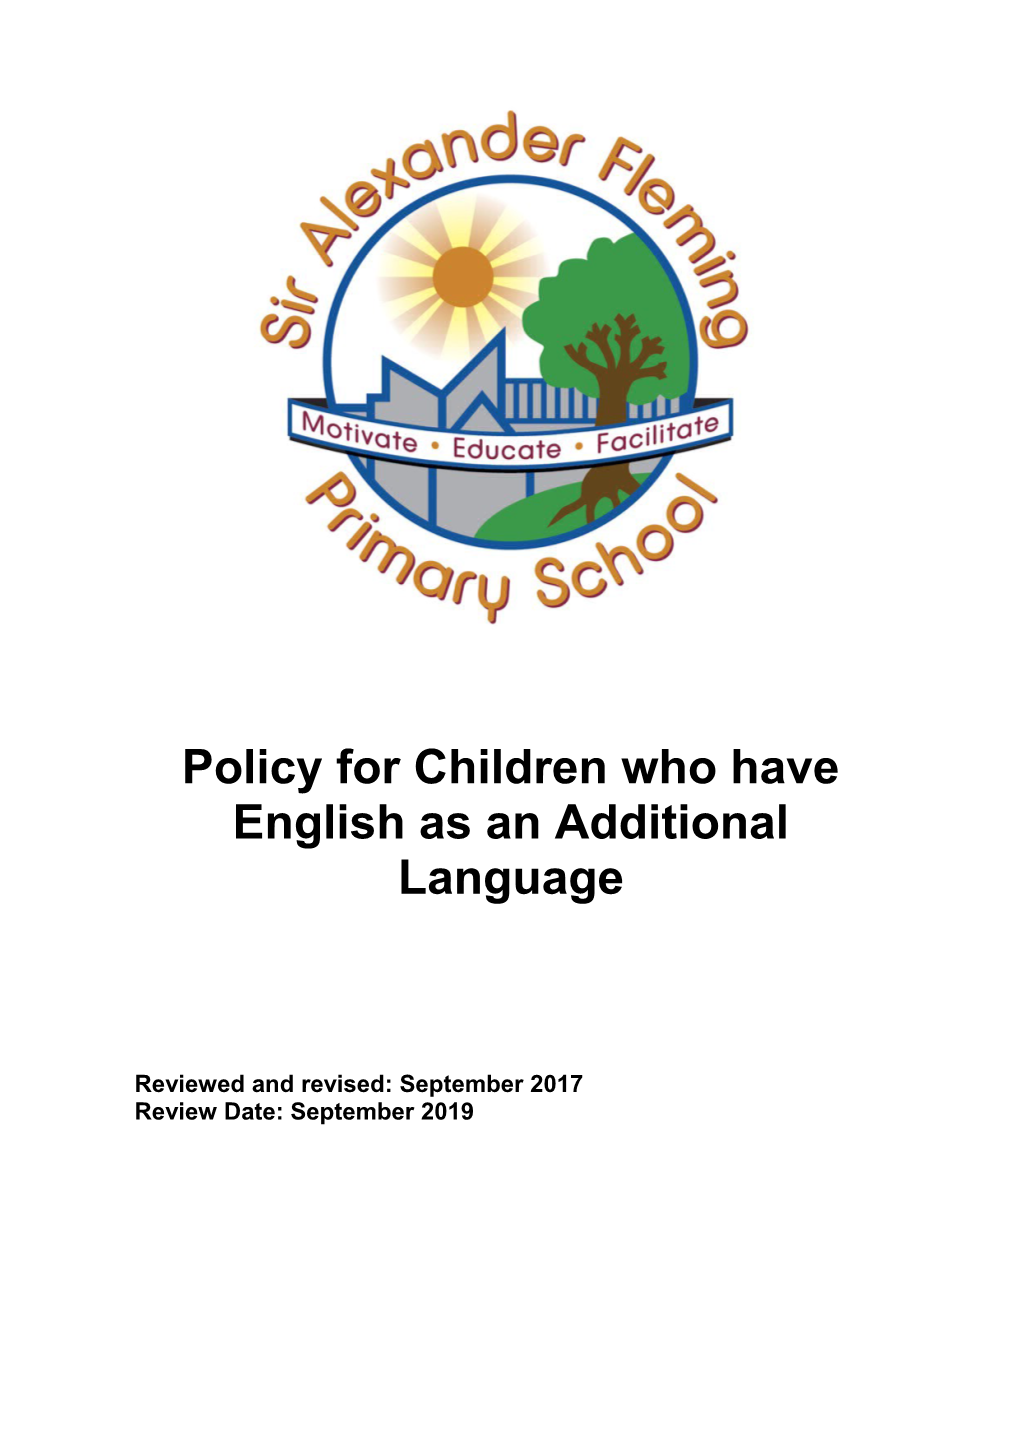 Policy for Children Who Have English As an Additional Language